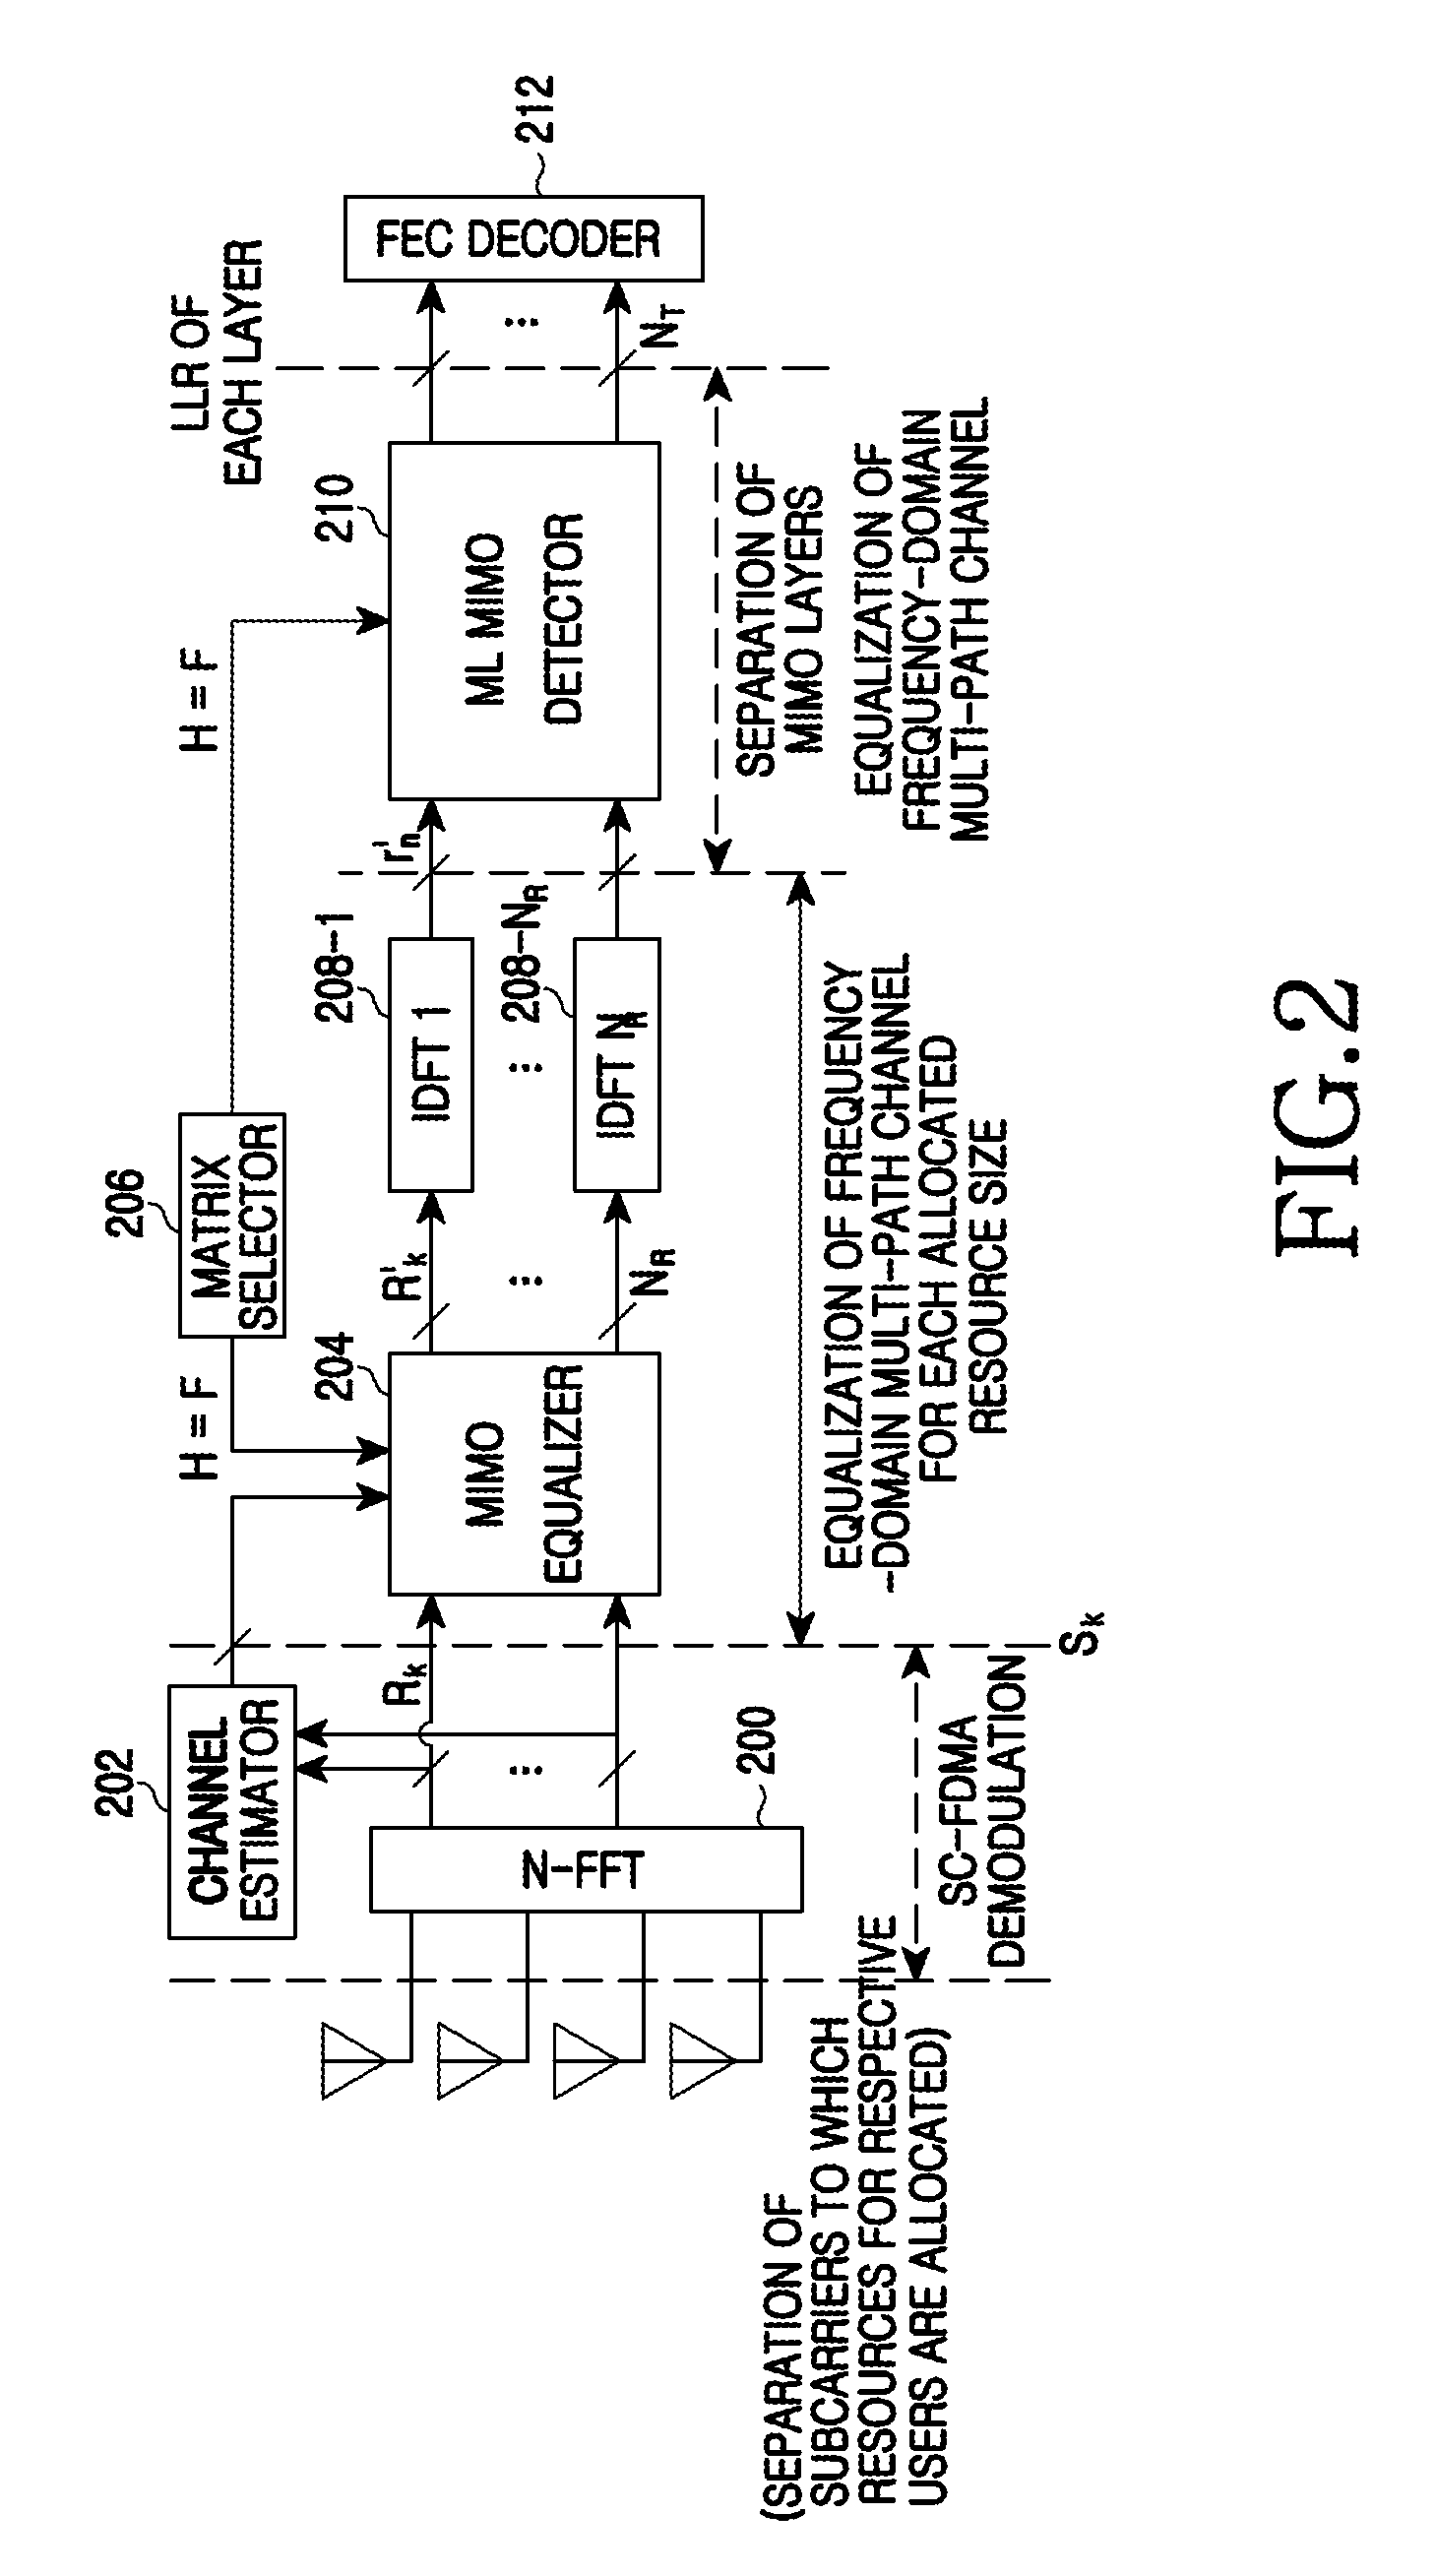 Receiving apparatus and method for single carrier frequency division access system